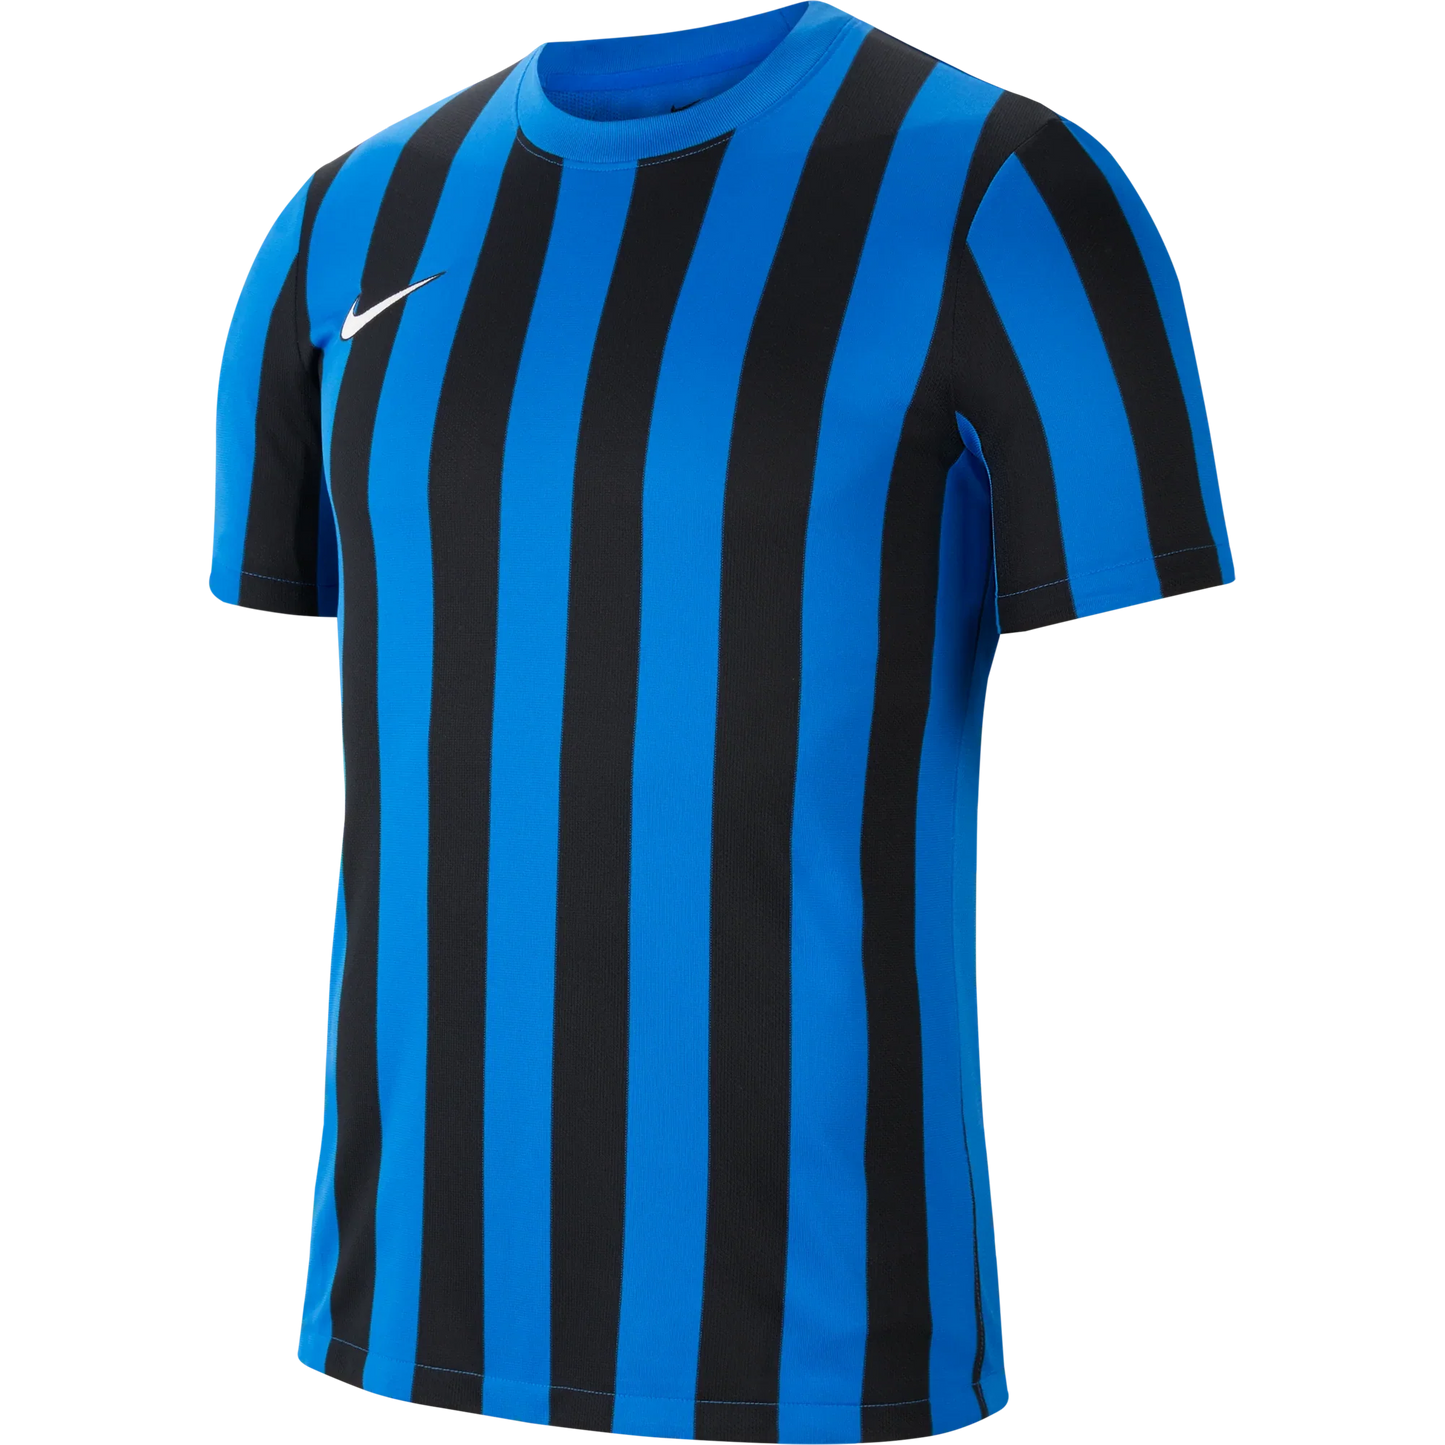 Striped Division IV Jersey S/S 2021